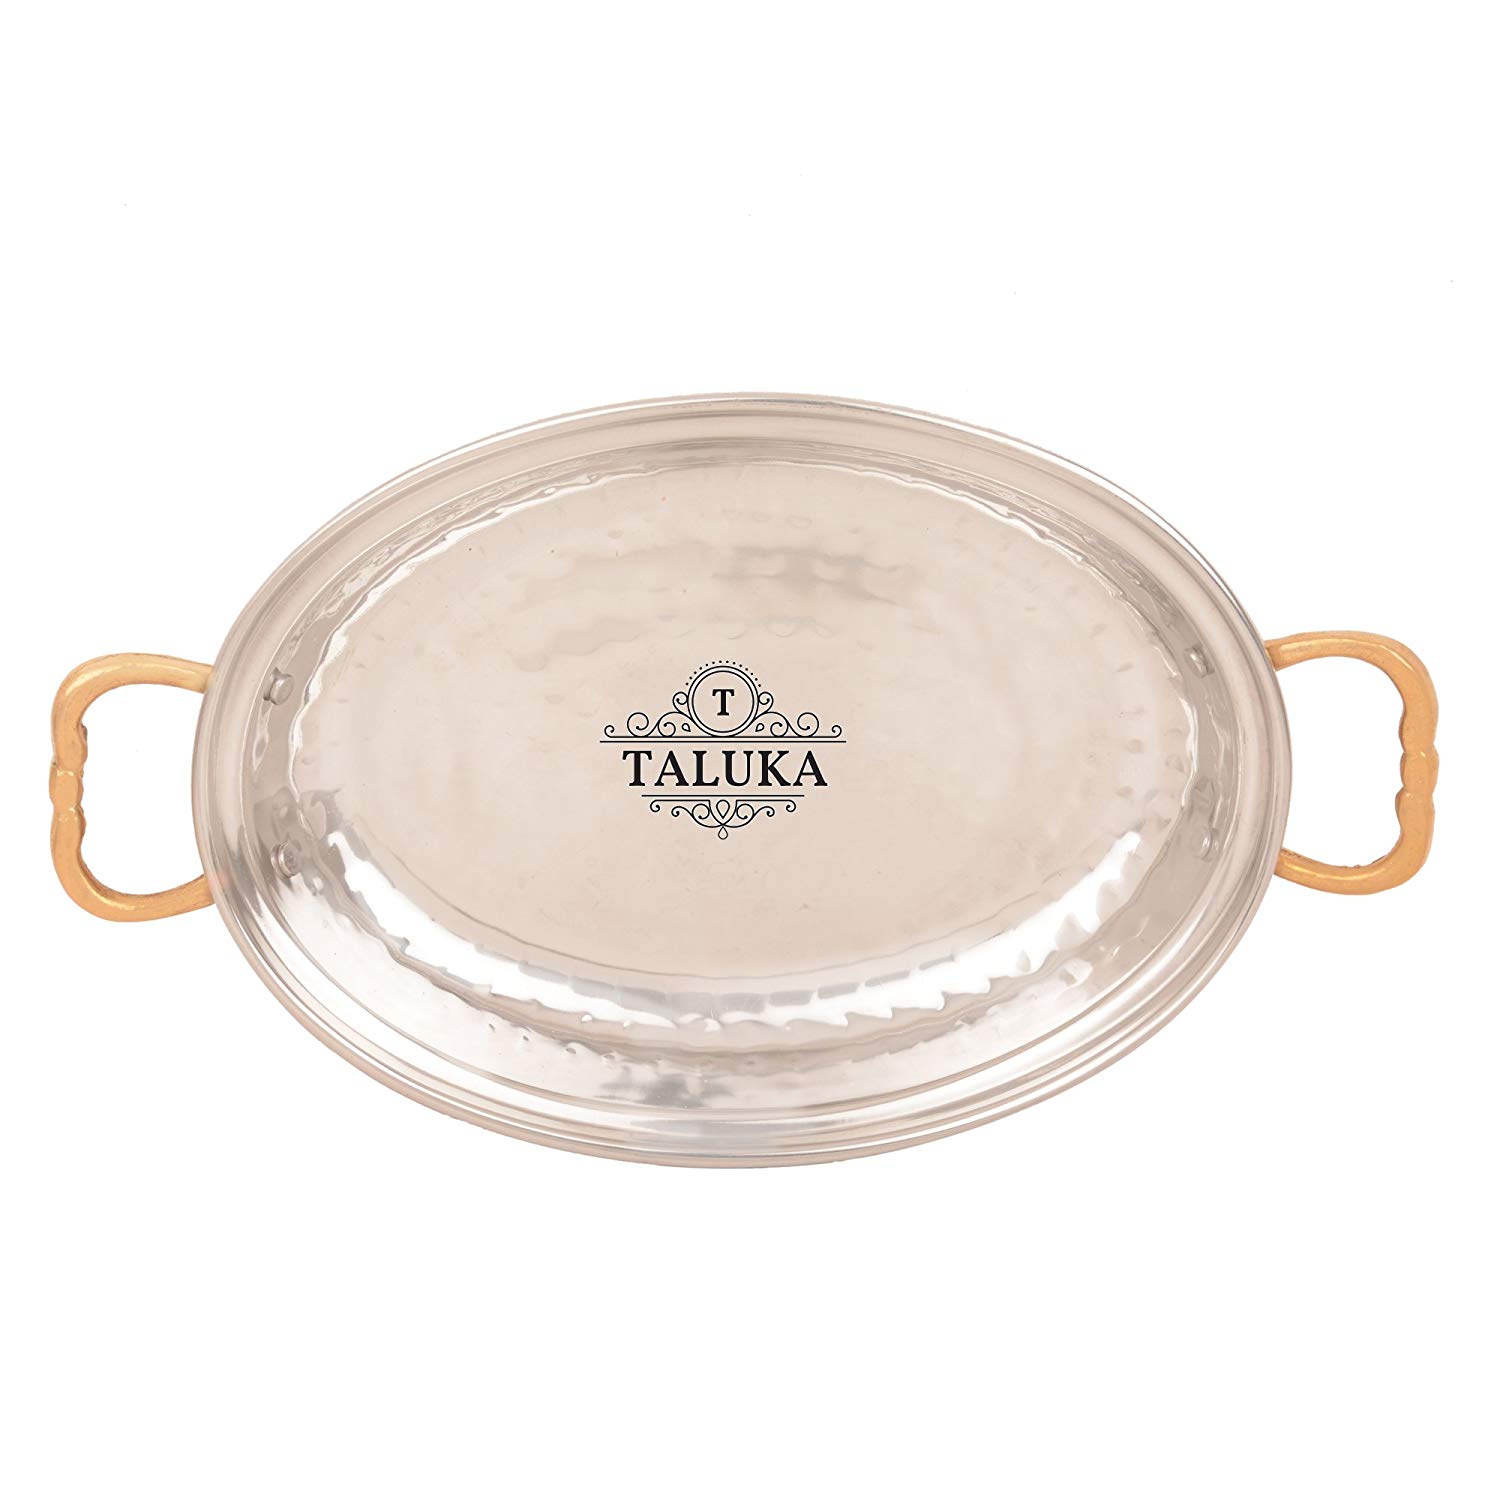 Copper Steel Serving Oval Platter With Brass Handle For Serveware